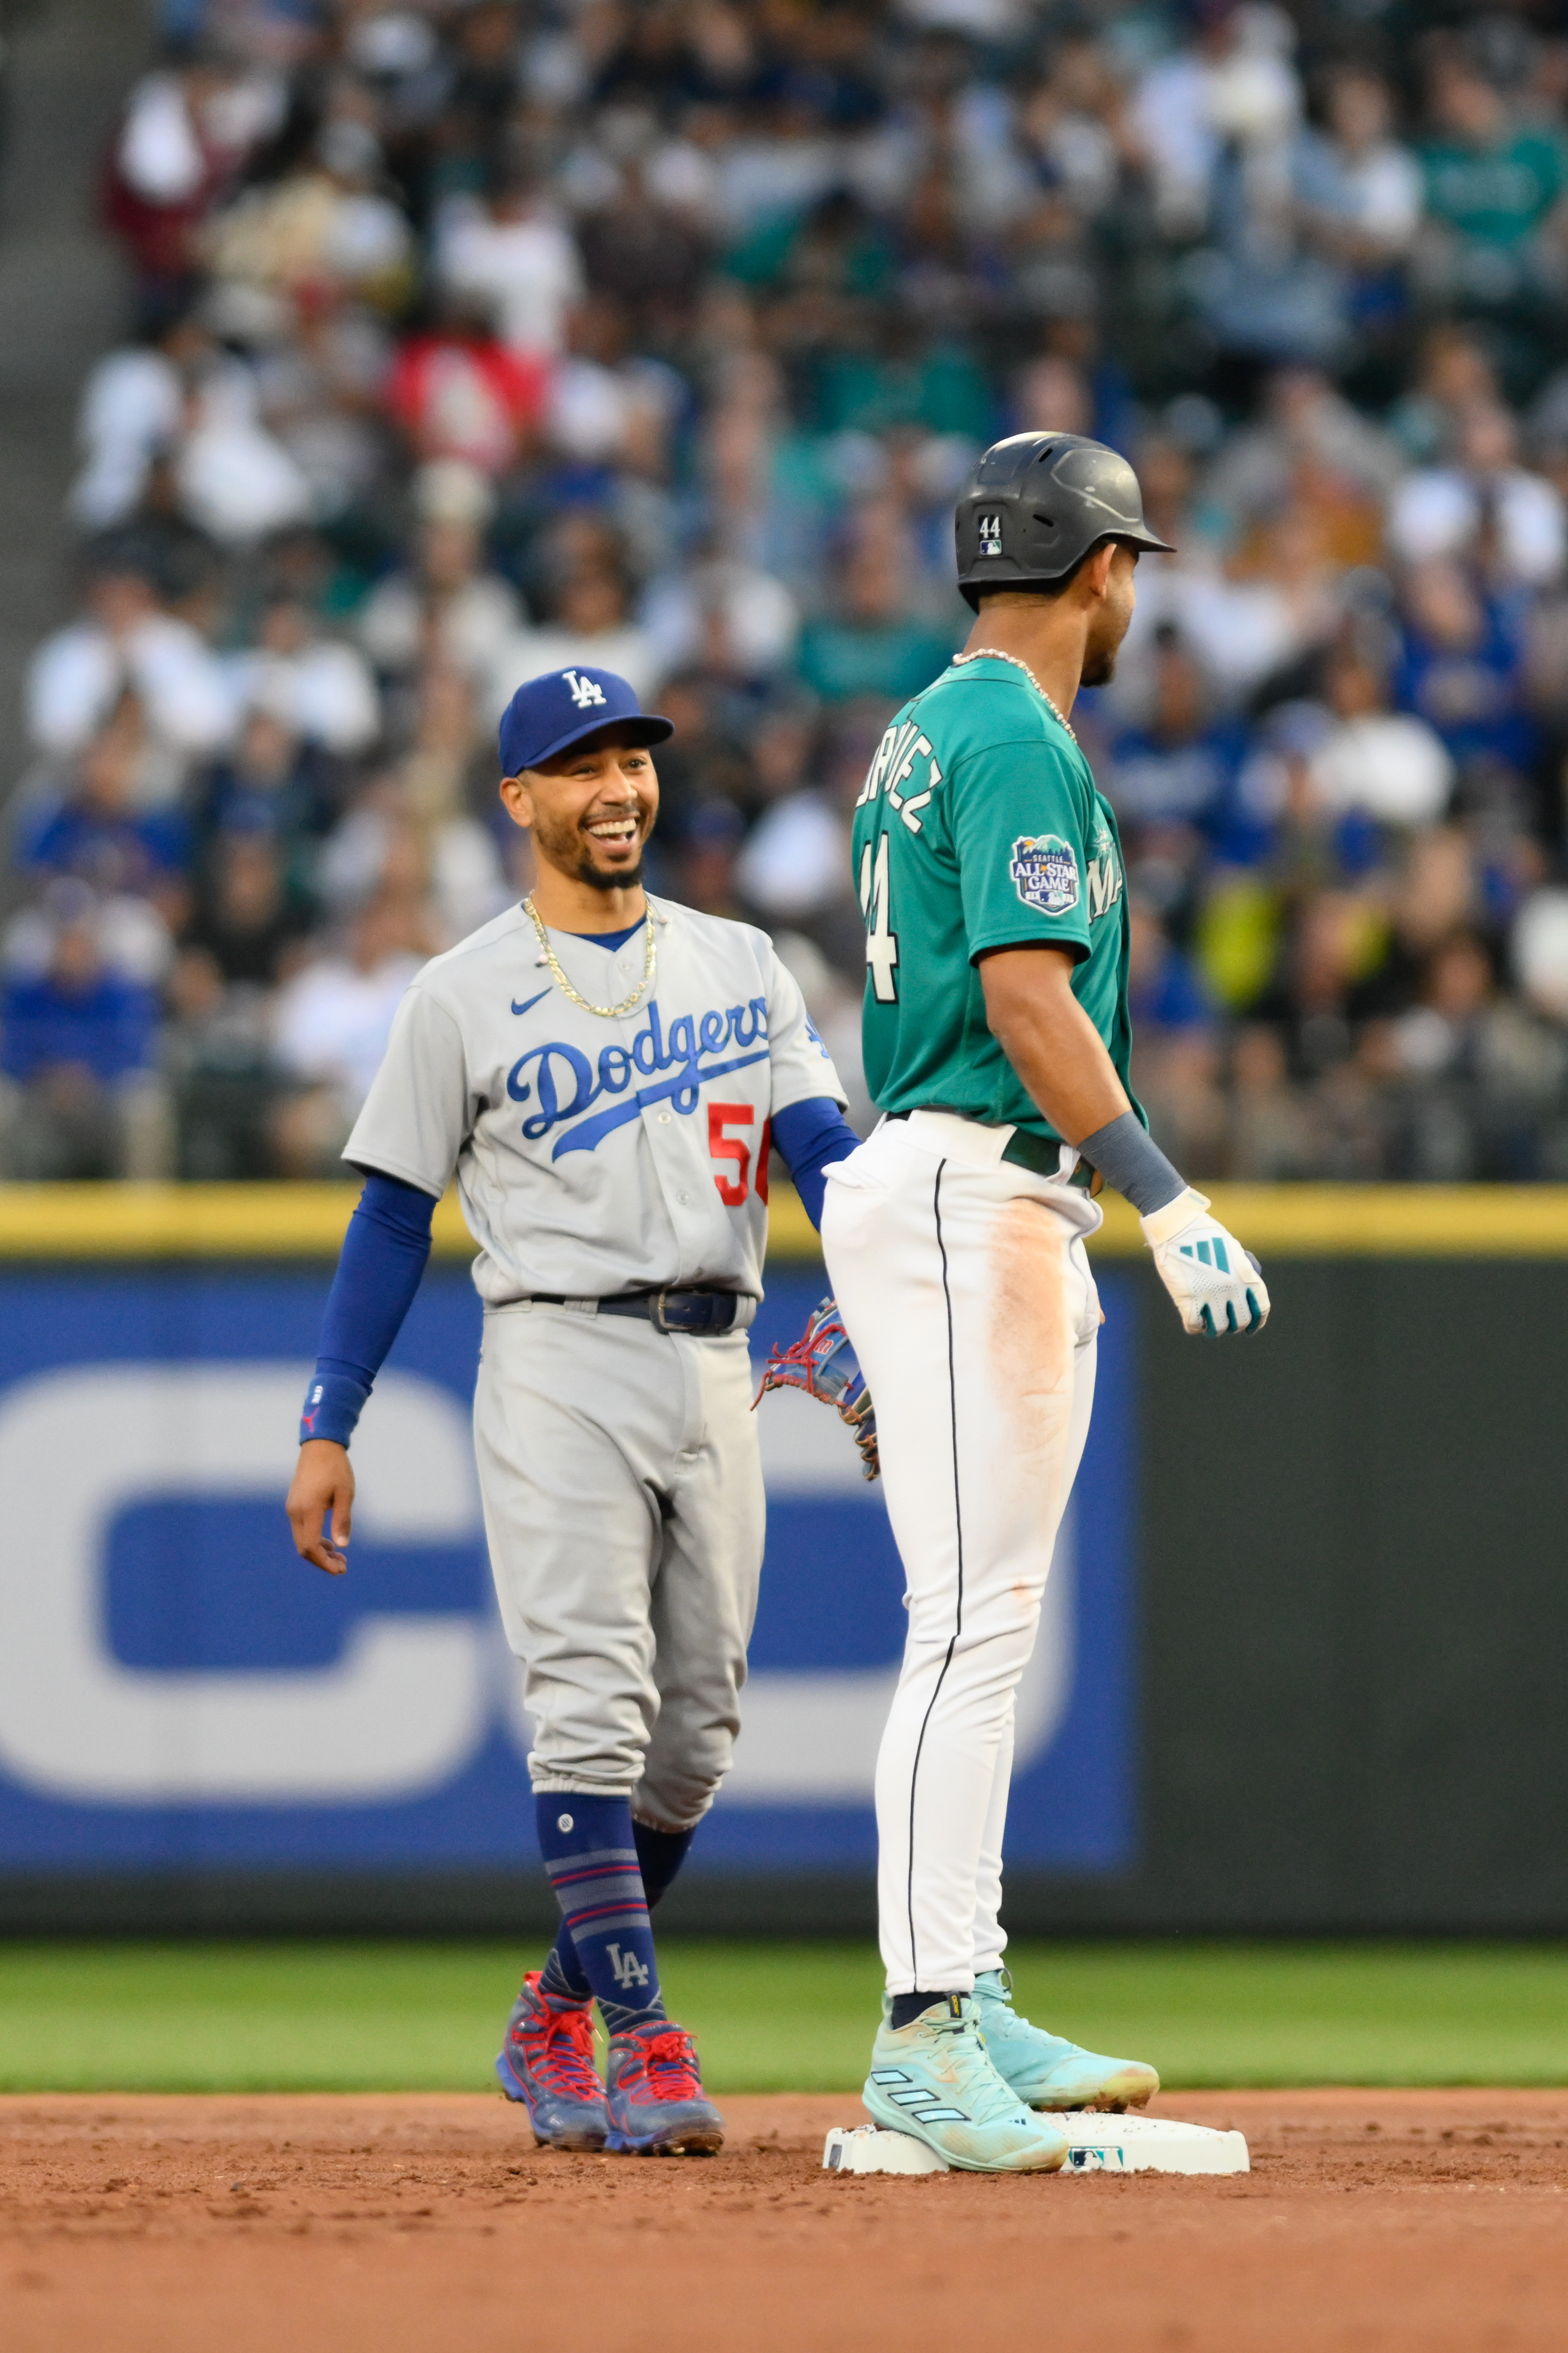 Dodgers clinch NL West title with 6-2 win over Mariners for 10th